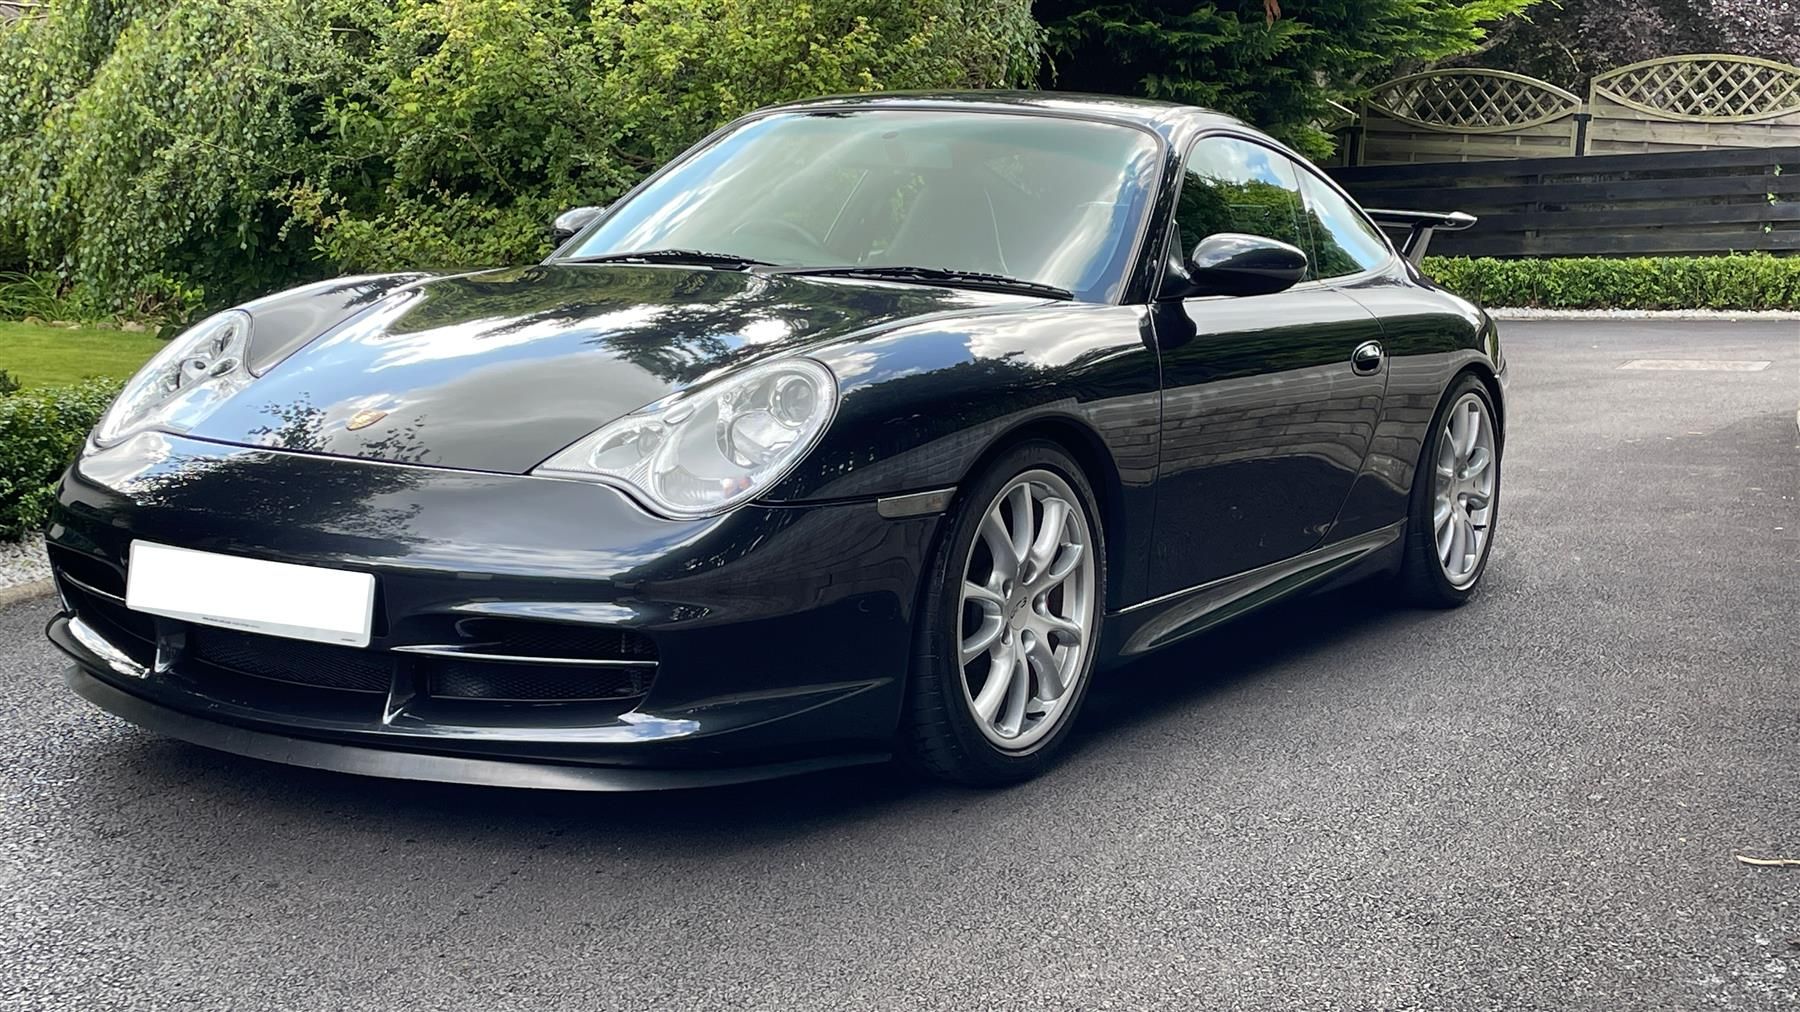 PORSCHE 996.2 GT3 Immaculate 1 Owner 15400 Miles Full Main Dealer Service History